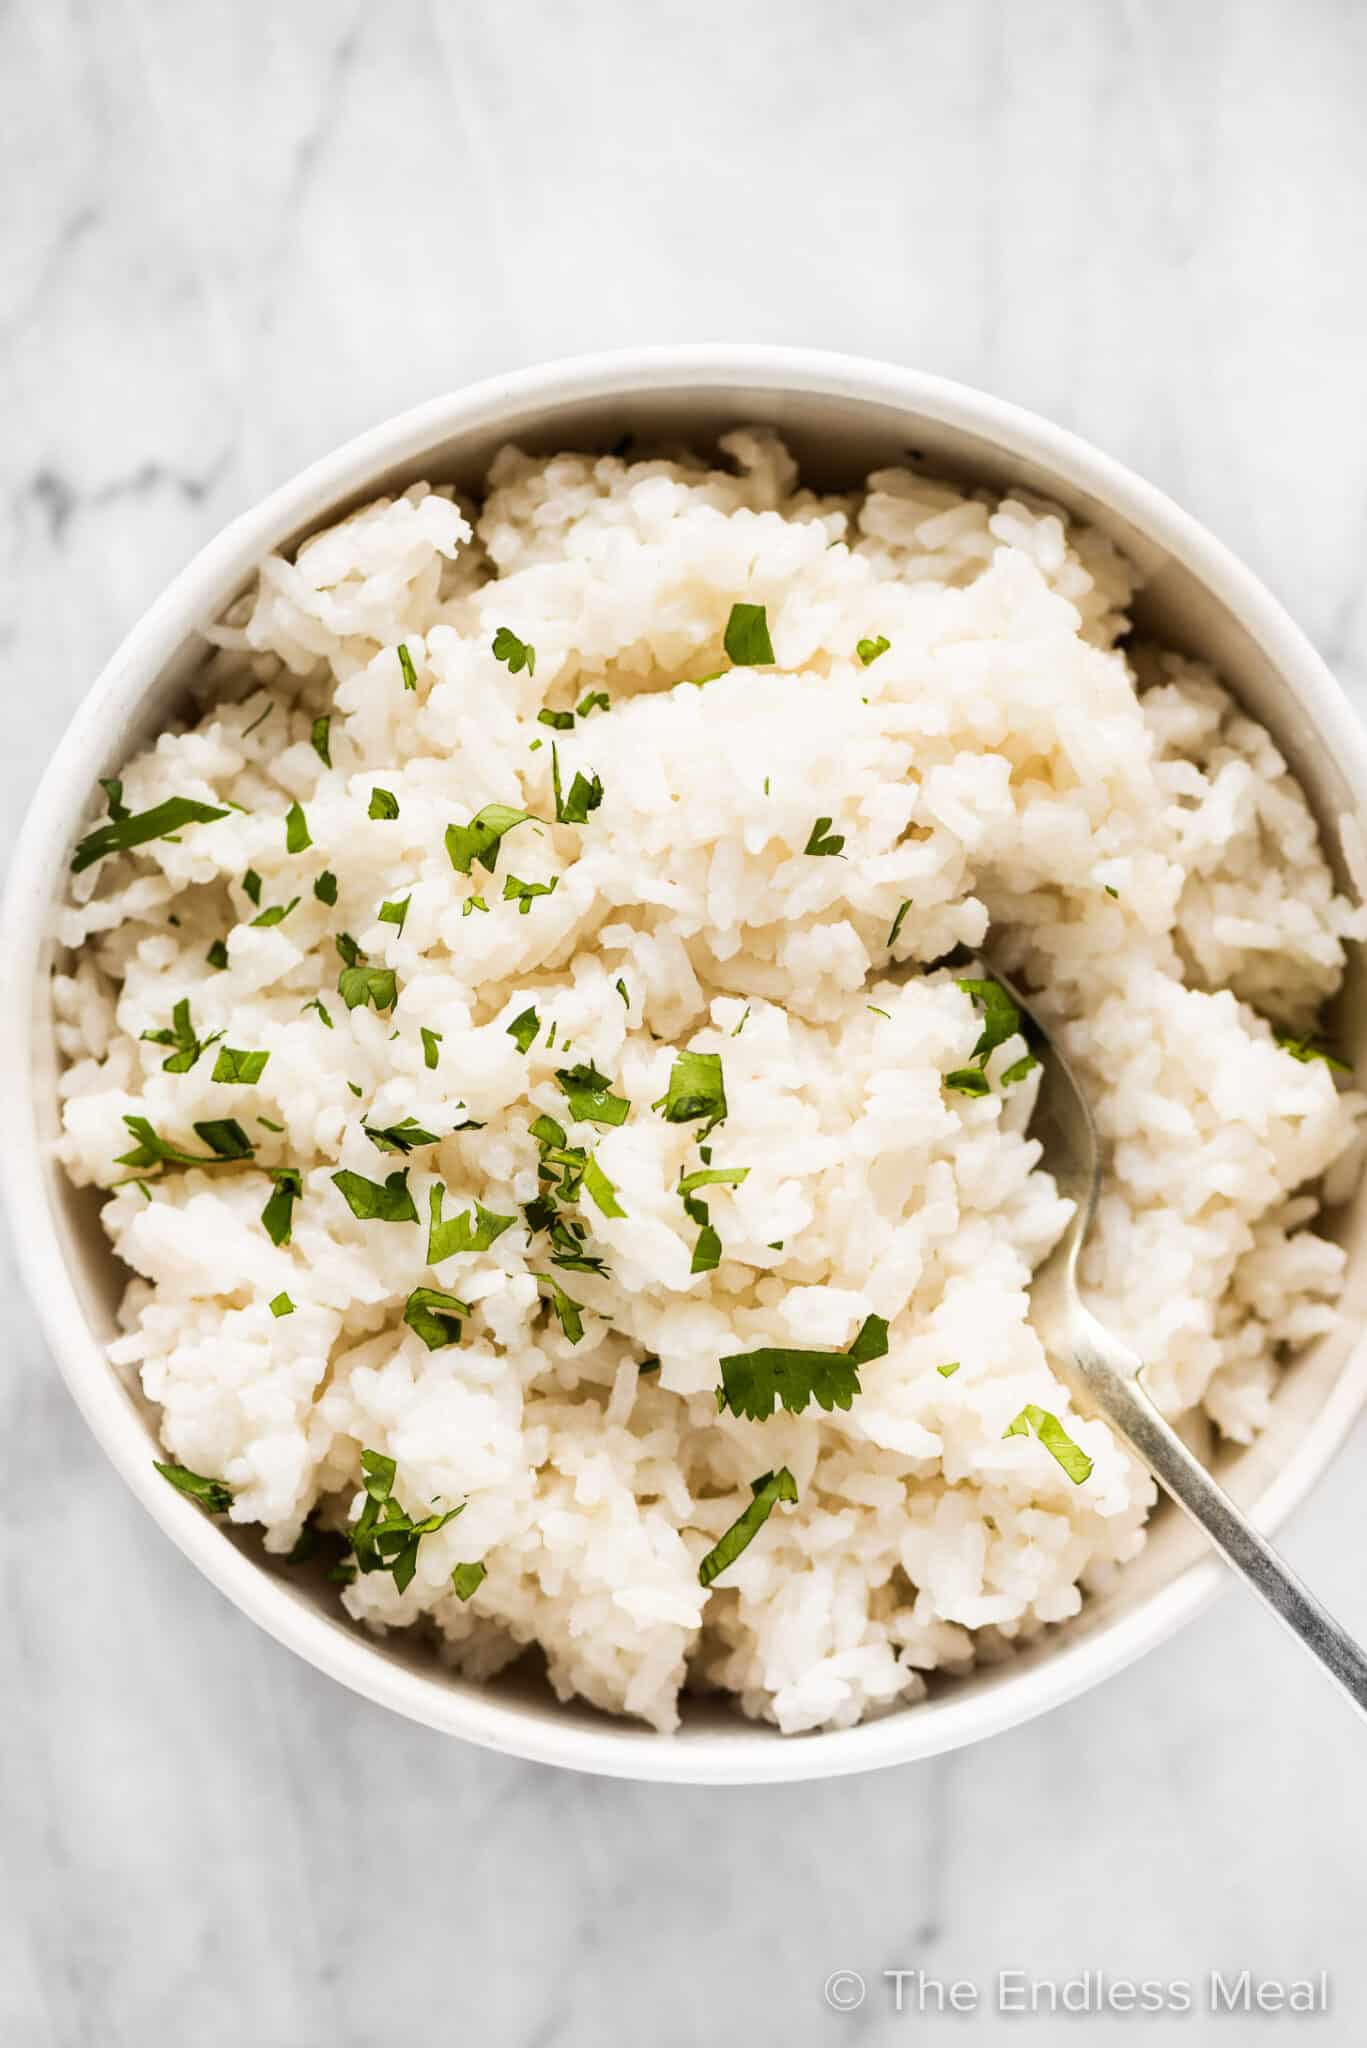 Coconut rice in a white bowl with a spoon.